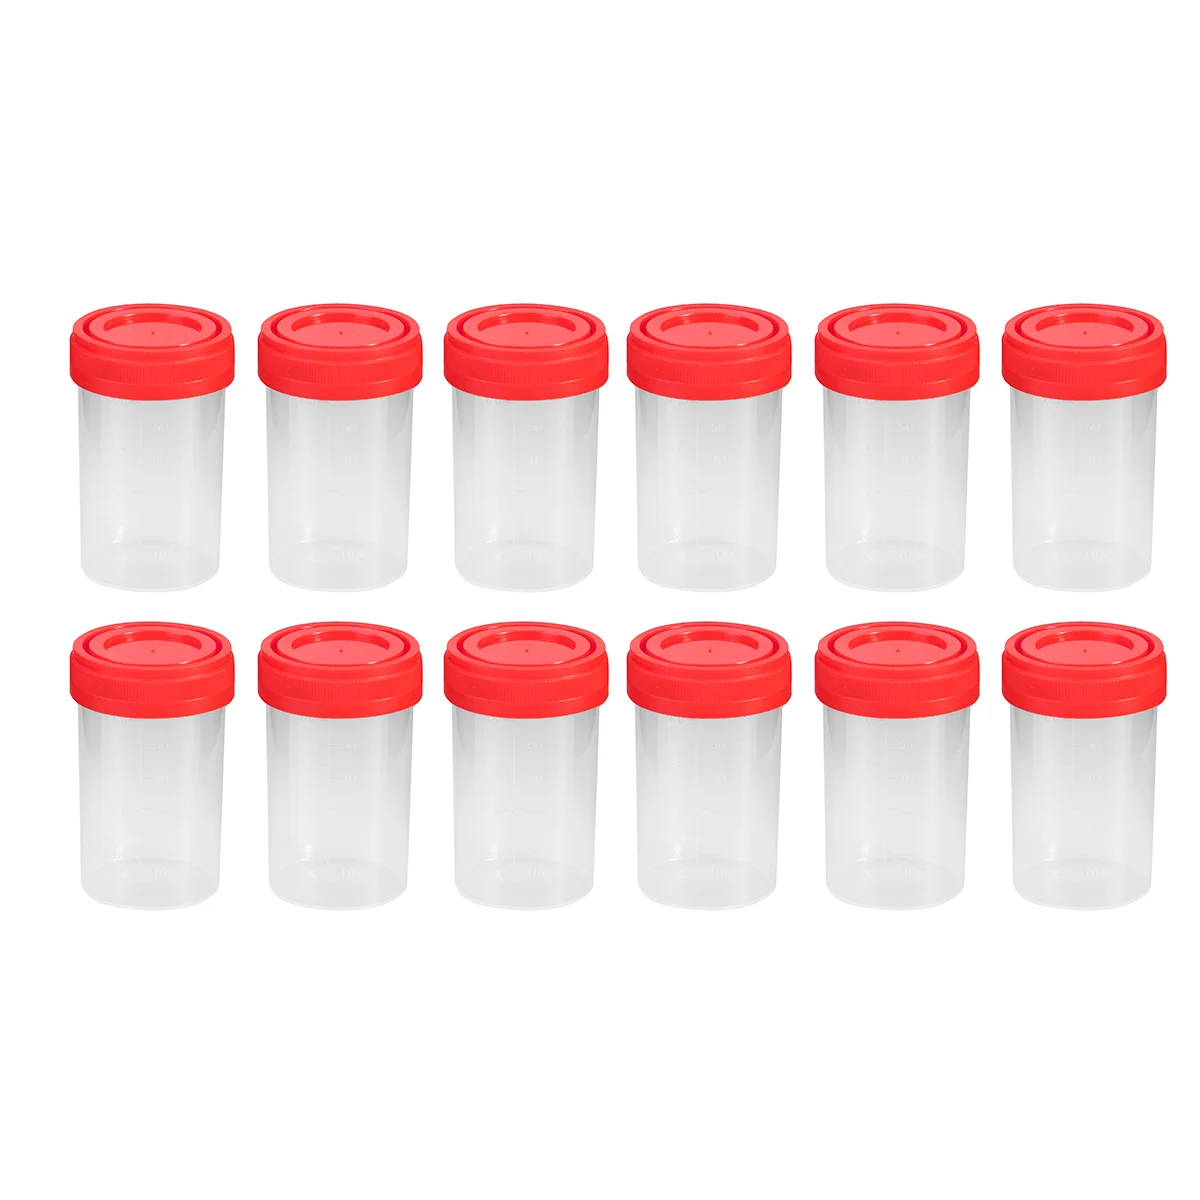 

20Pcs Practical Plastic Specimen Cup Urine Container 60ml EO without Lable Laboratory Medical Use (Random Color)